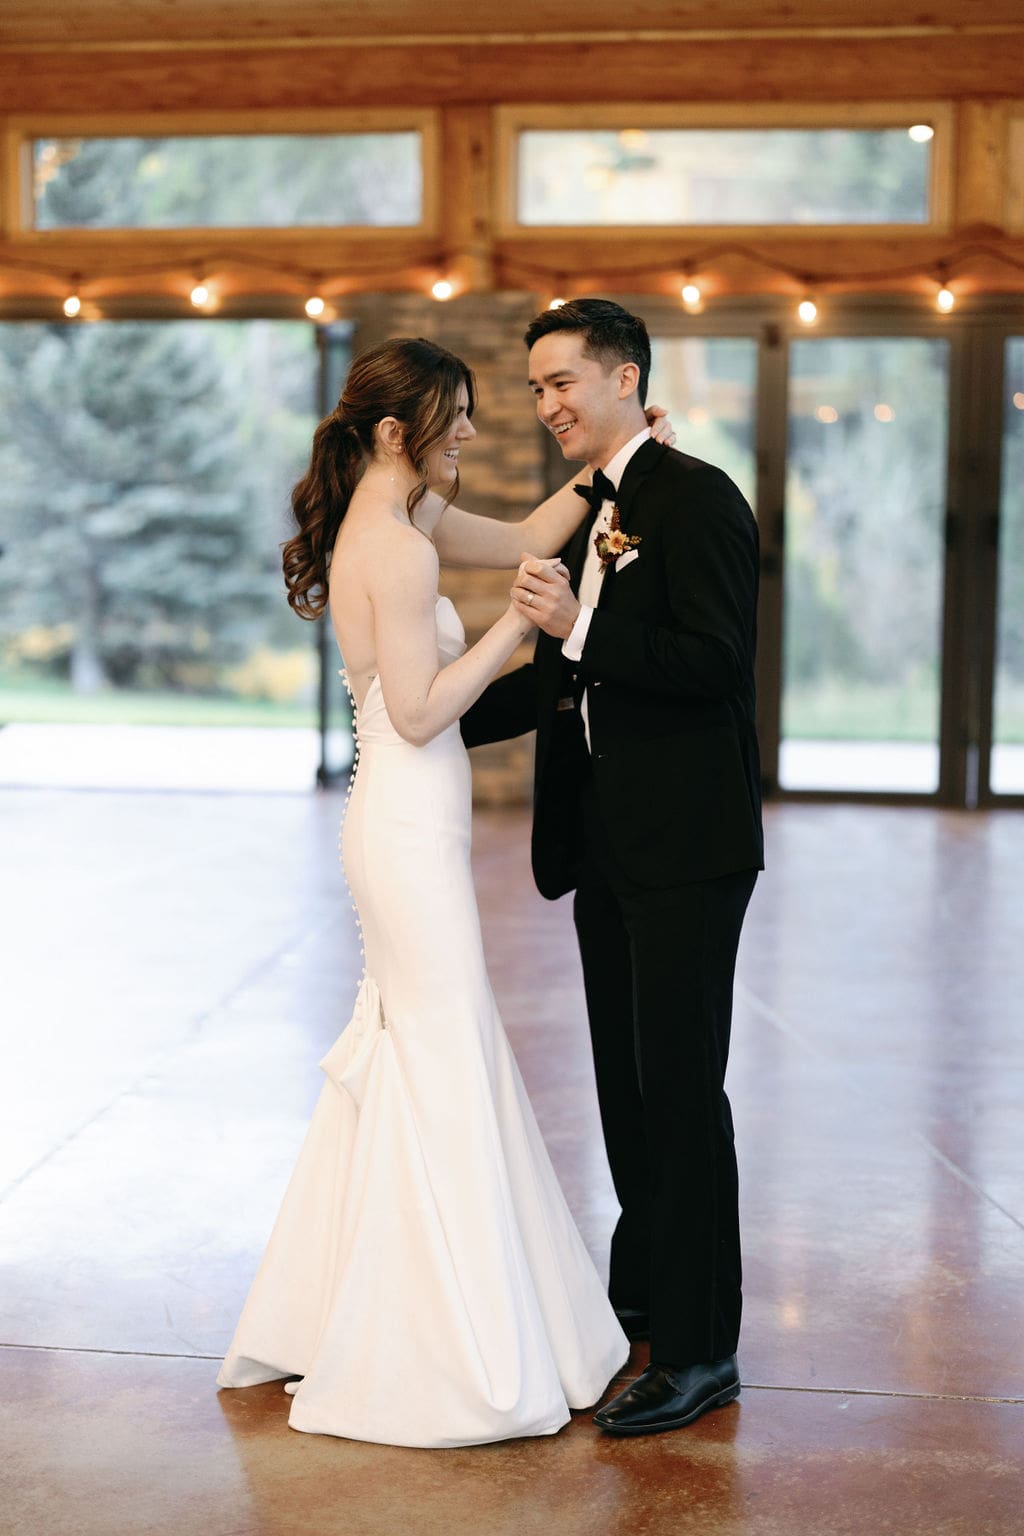 Couples first dance to A cover of blink 182s First Date by Taylor Acorn. Romantic dancing at mt princeton hot springs on the dance floor of wedding reception